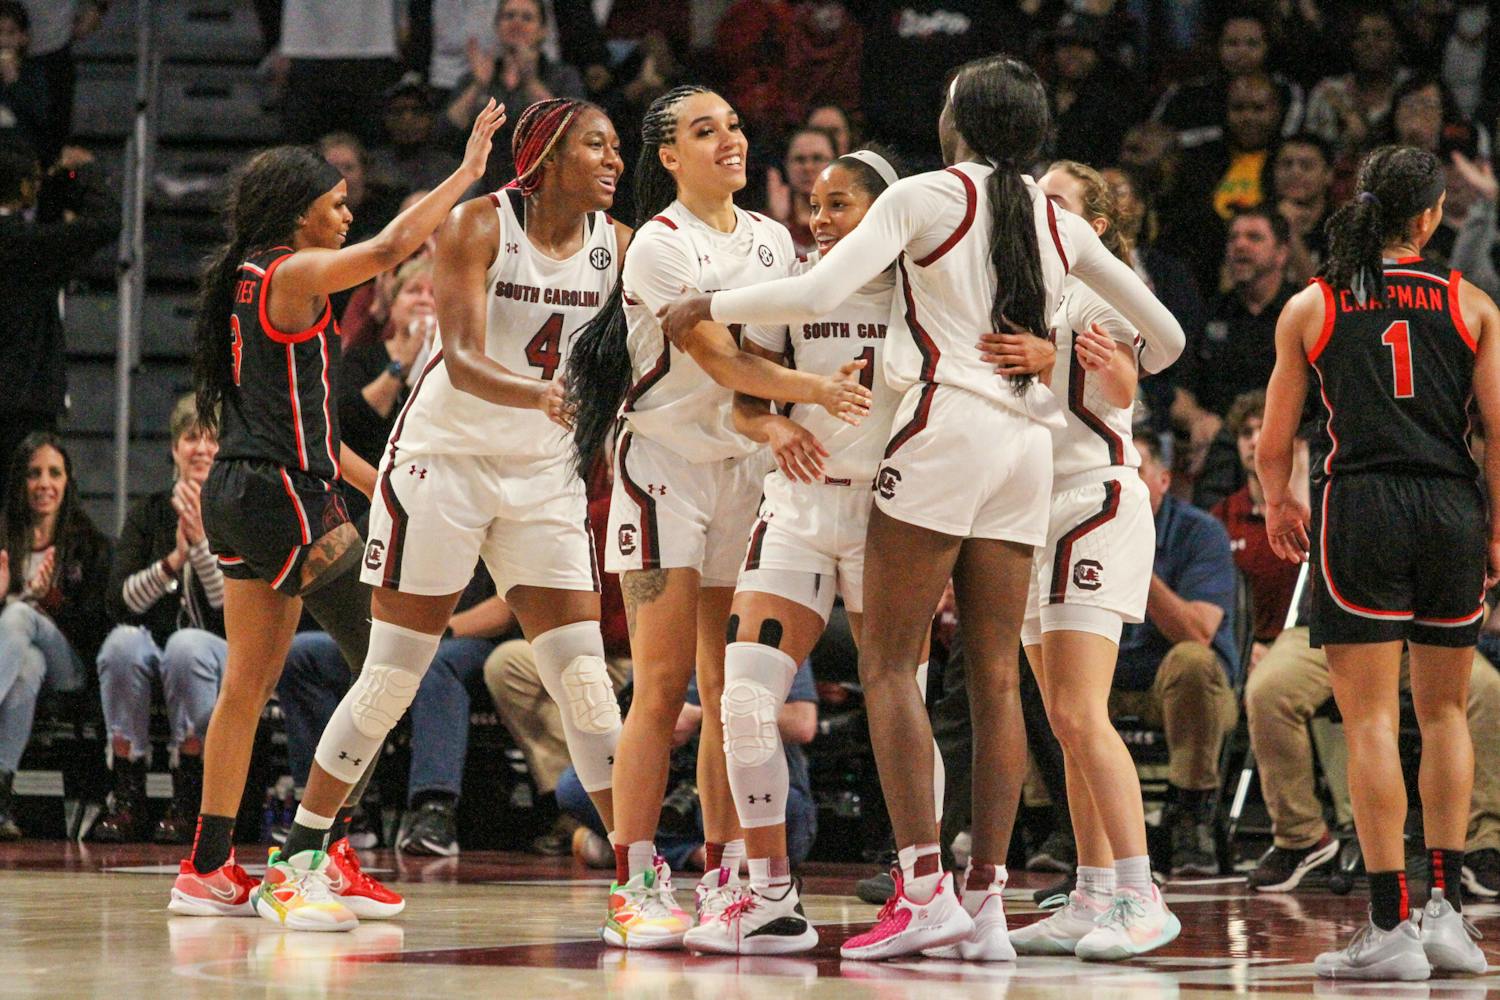 South Carolina women's basketball team claimed the SEC regular 鶹С򽴫ý championship following its 73-63 victory over the Georgia Bulldogs at Colonial Life Arena on Feb. 26, 2023. The Gamecocks remain undefeated heading into the SEC tournament next week in Greenville, South Carolina.